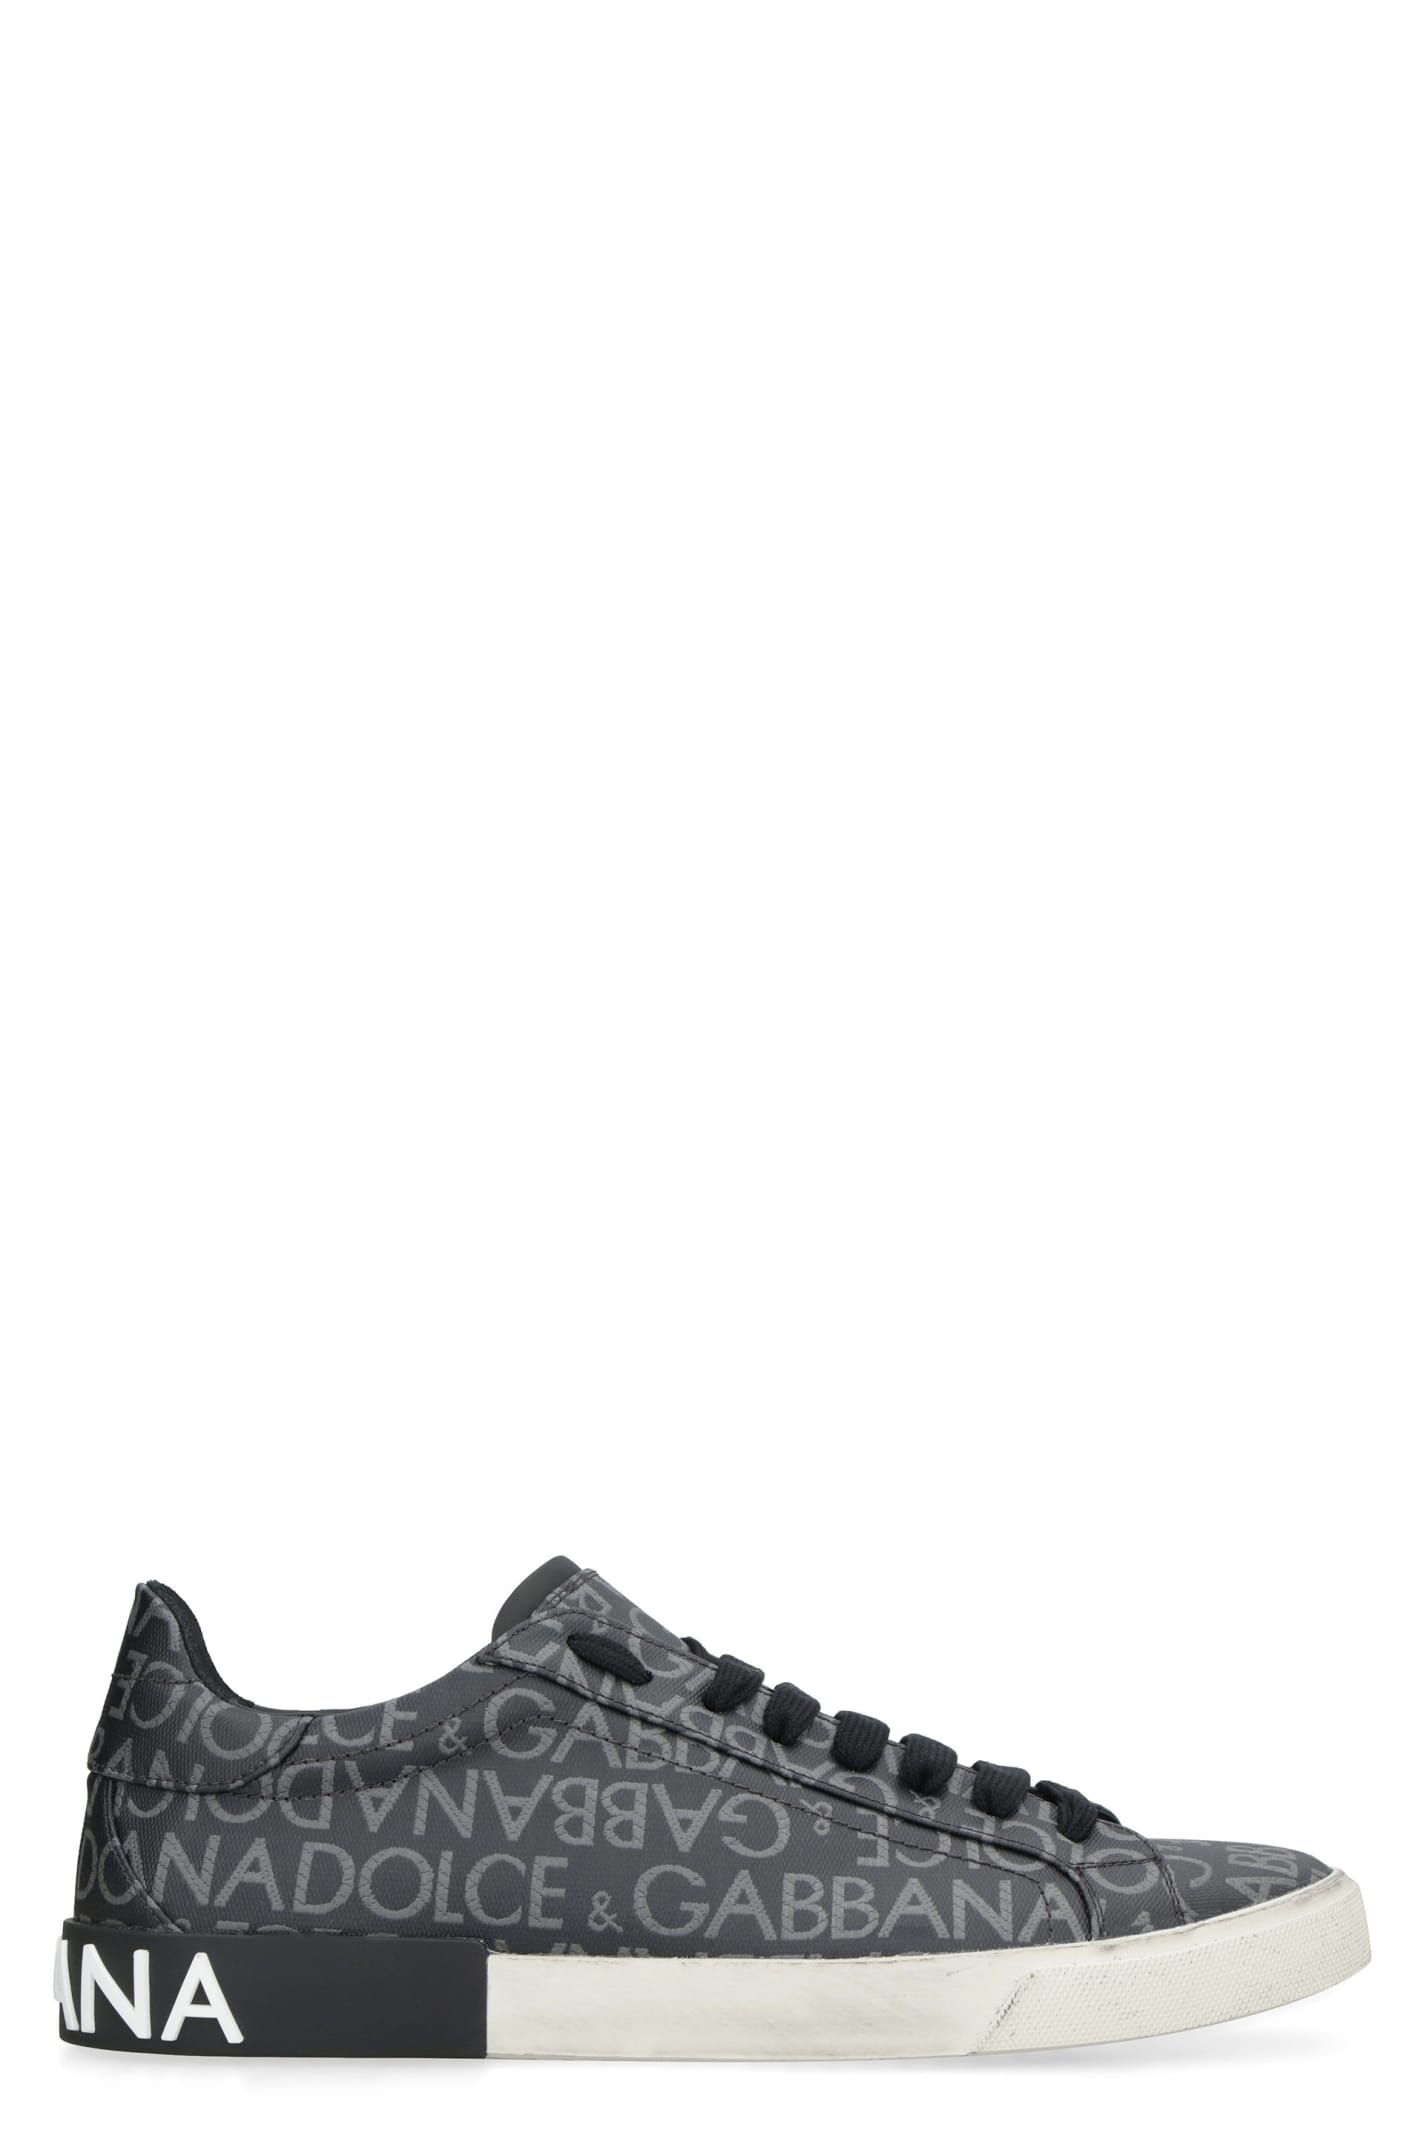 Shop Dolce & Gabbana Portofino Leather And Fabric Low-top Sneakers